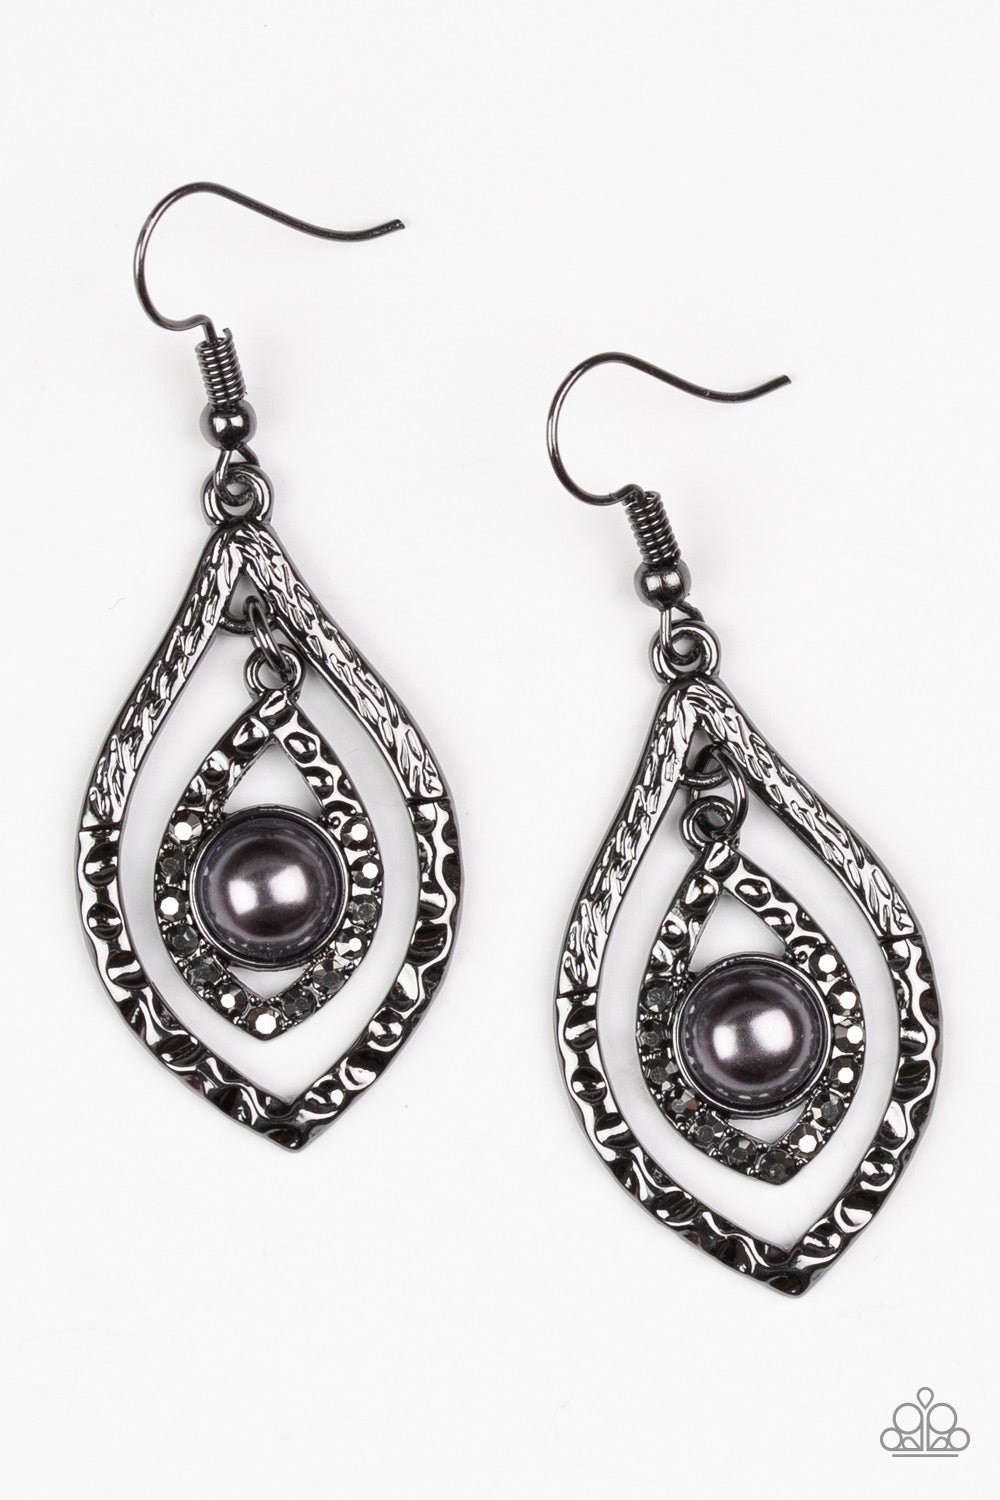 Paparazzi Breaking Glass Ceilings - Black Hammered Gunmetal Earrings –  Sugar Bee Bling - Paparazzi Jewelry and Accessories